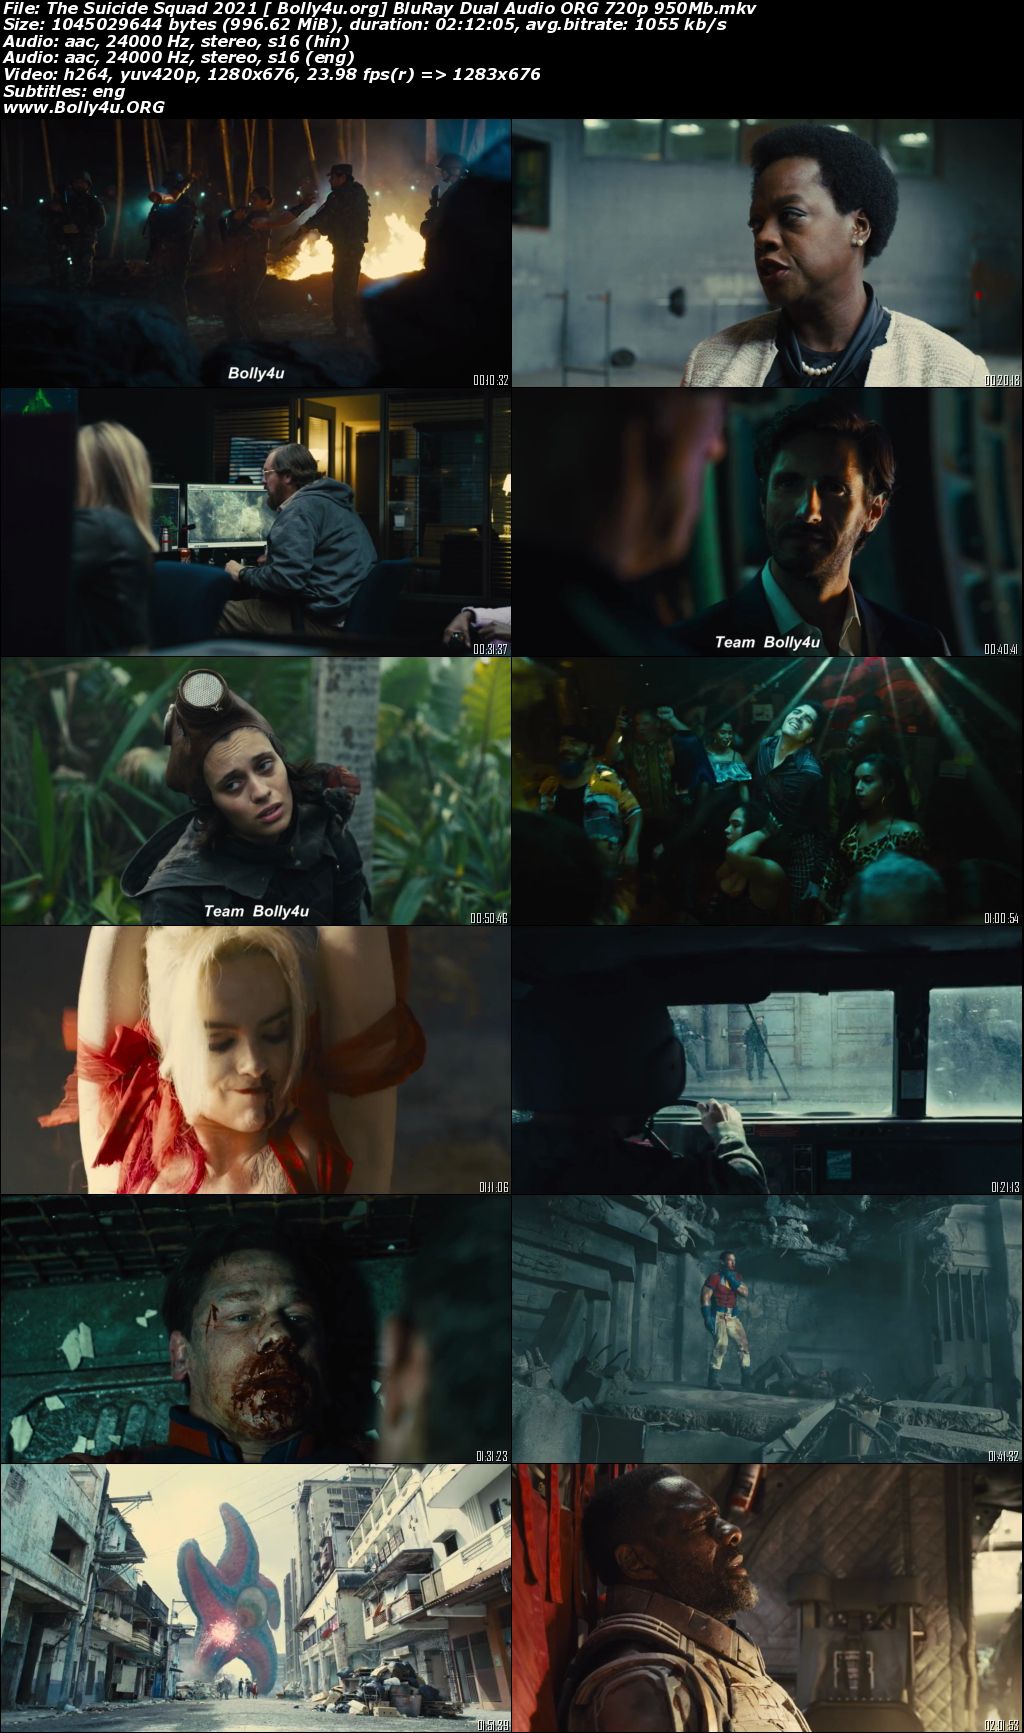 The Suicide Squad 2021 BluRay 950MB Hindi Dua Audio ORG 720p Download